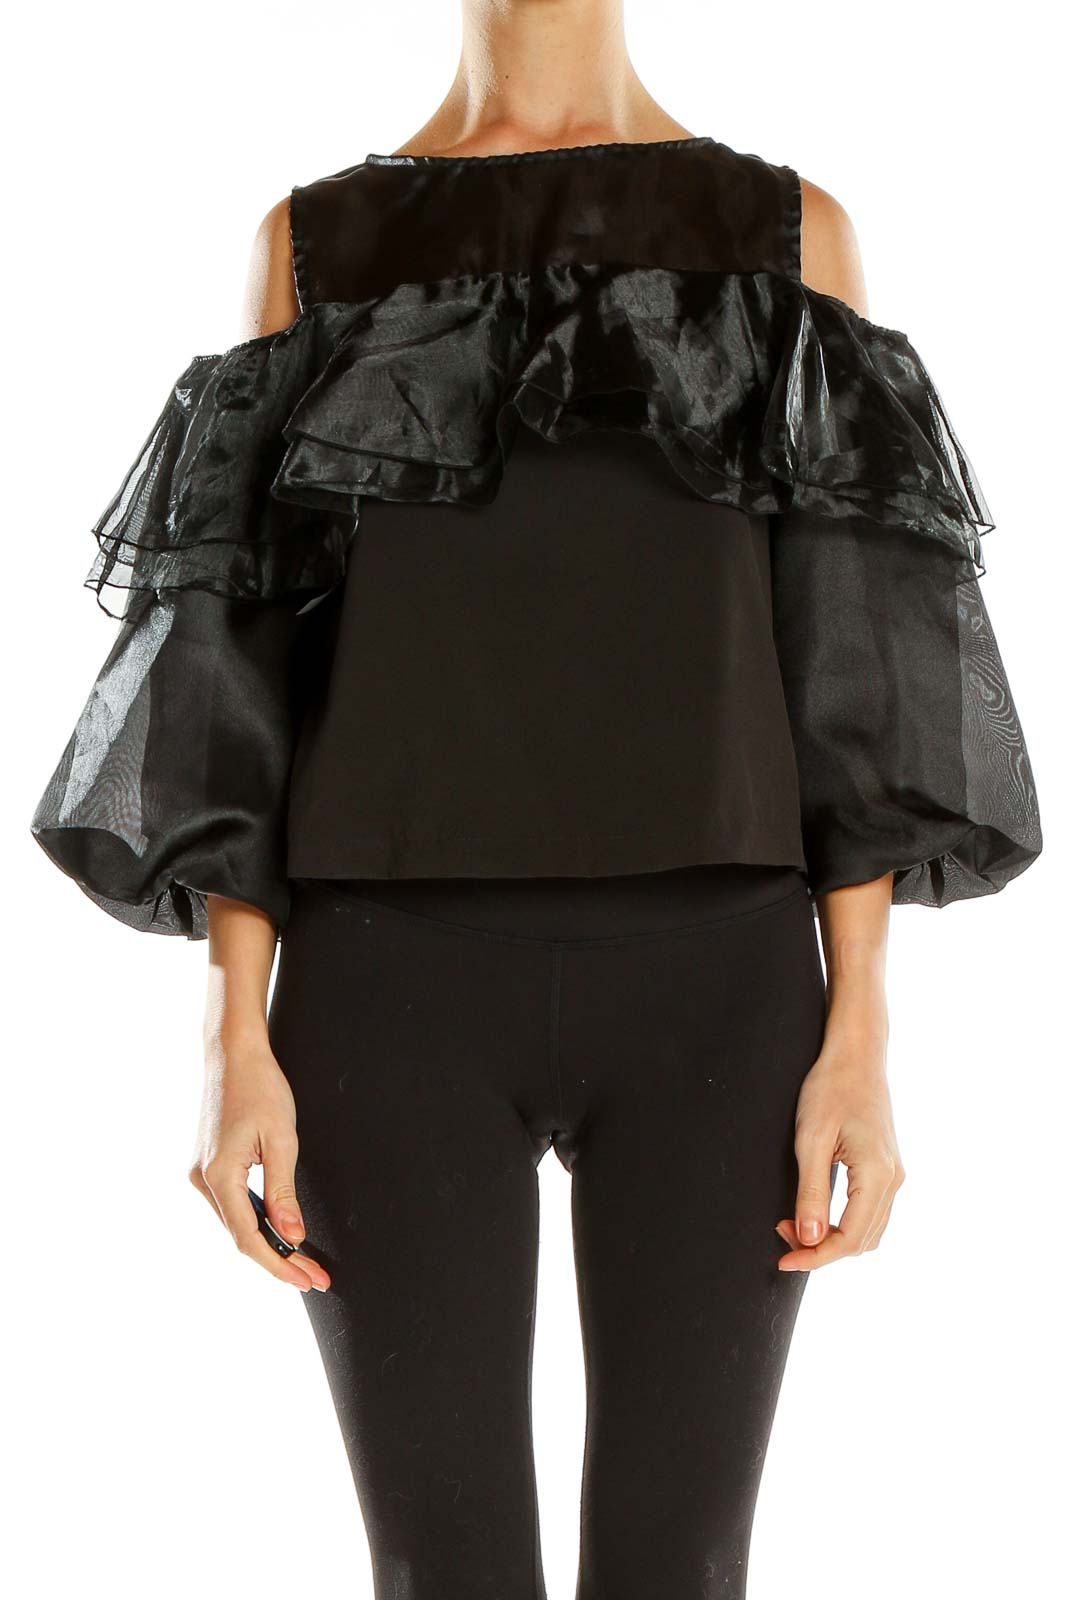 Black Ruffle Party Top Front